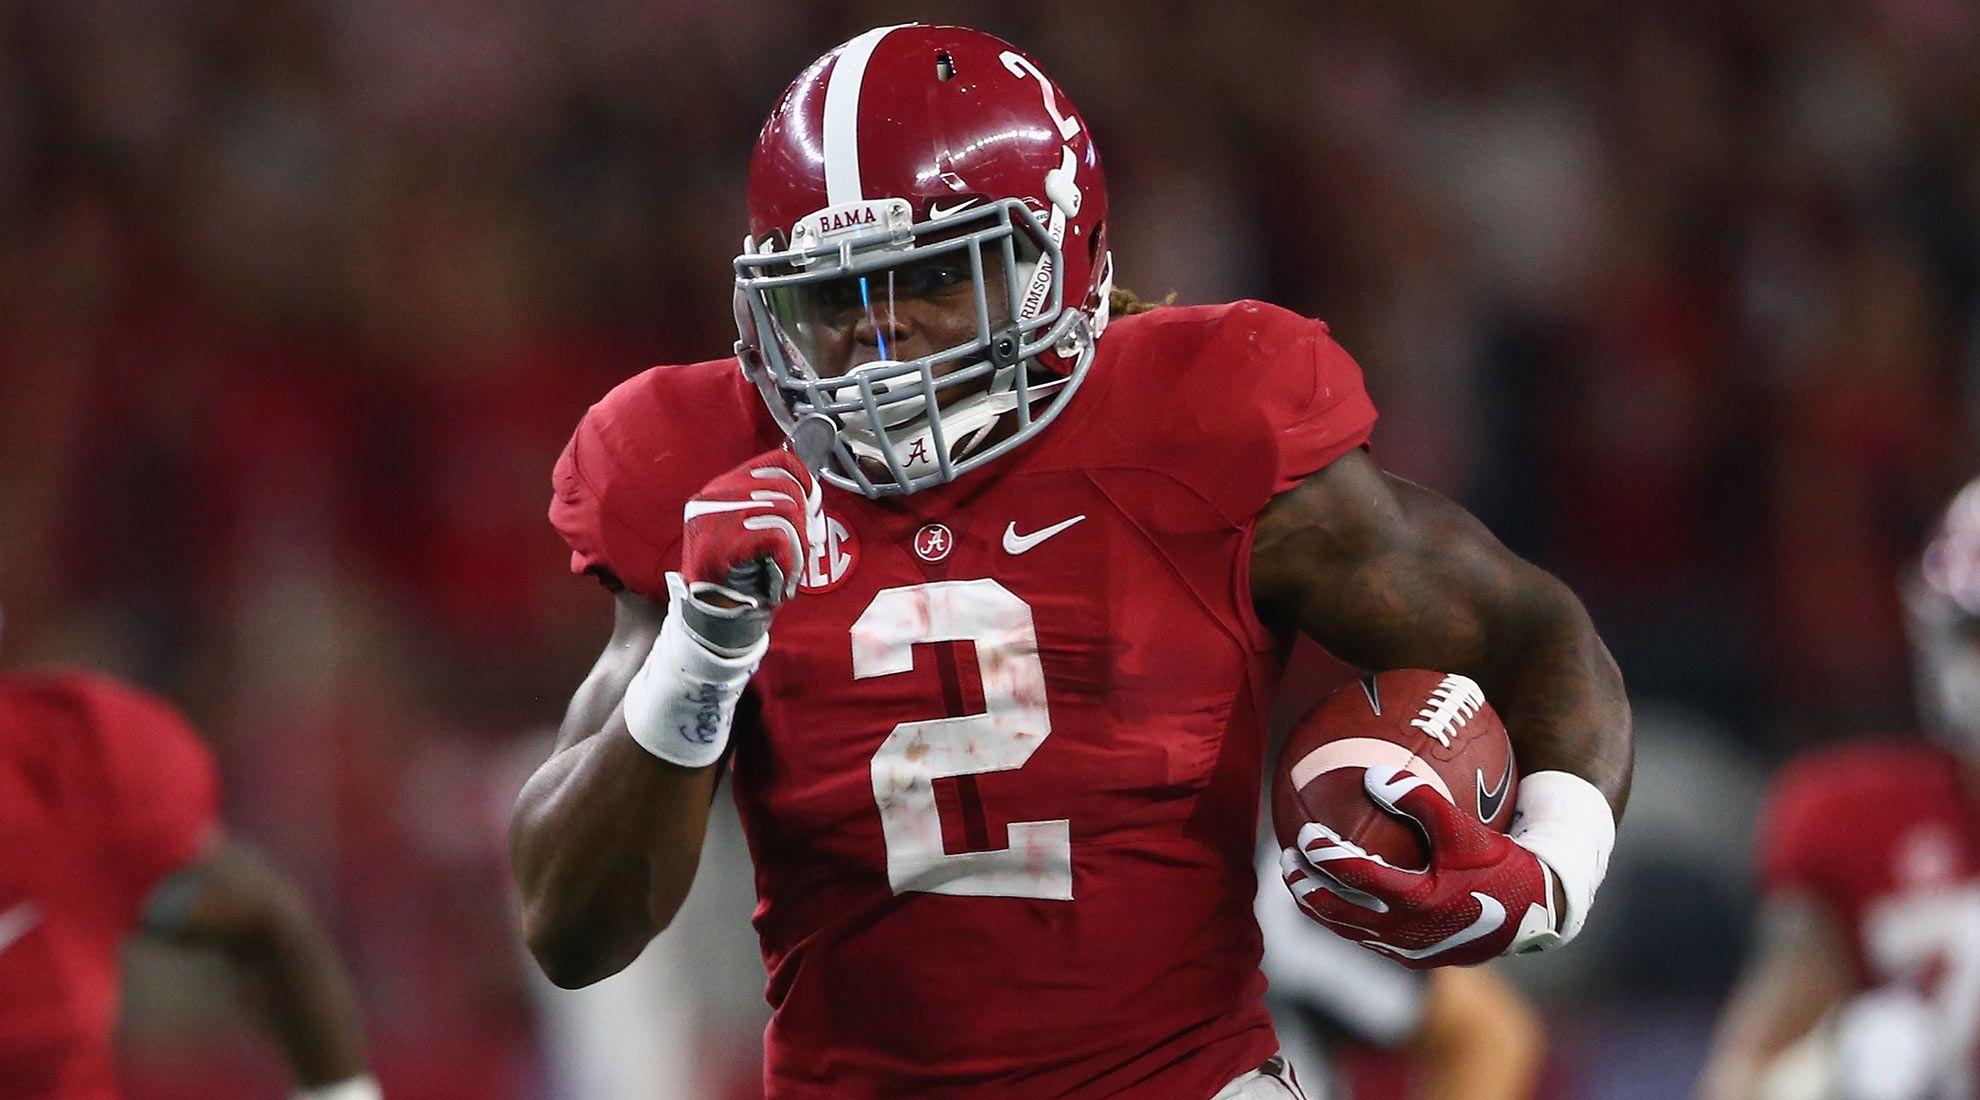 Derrick Henry has become the centerpiece of Alabama. Sports on Earth